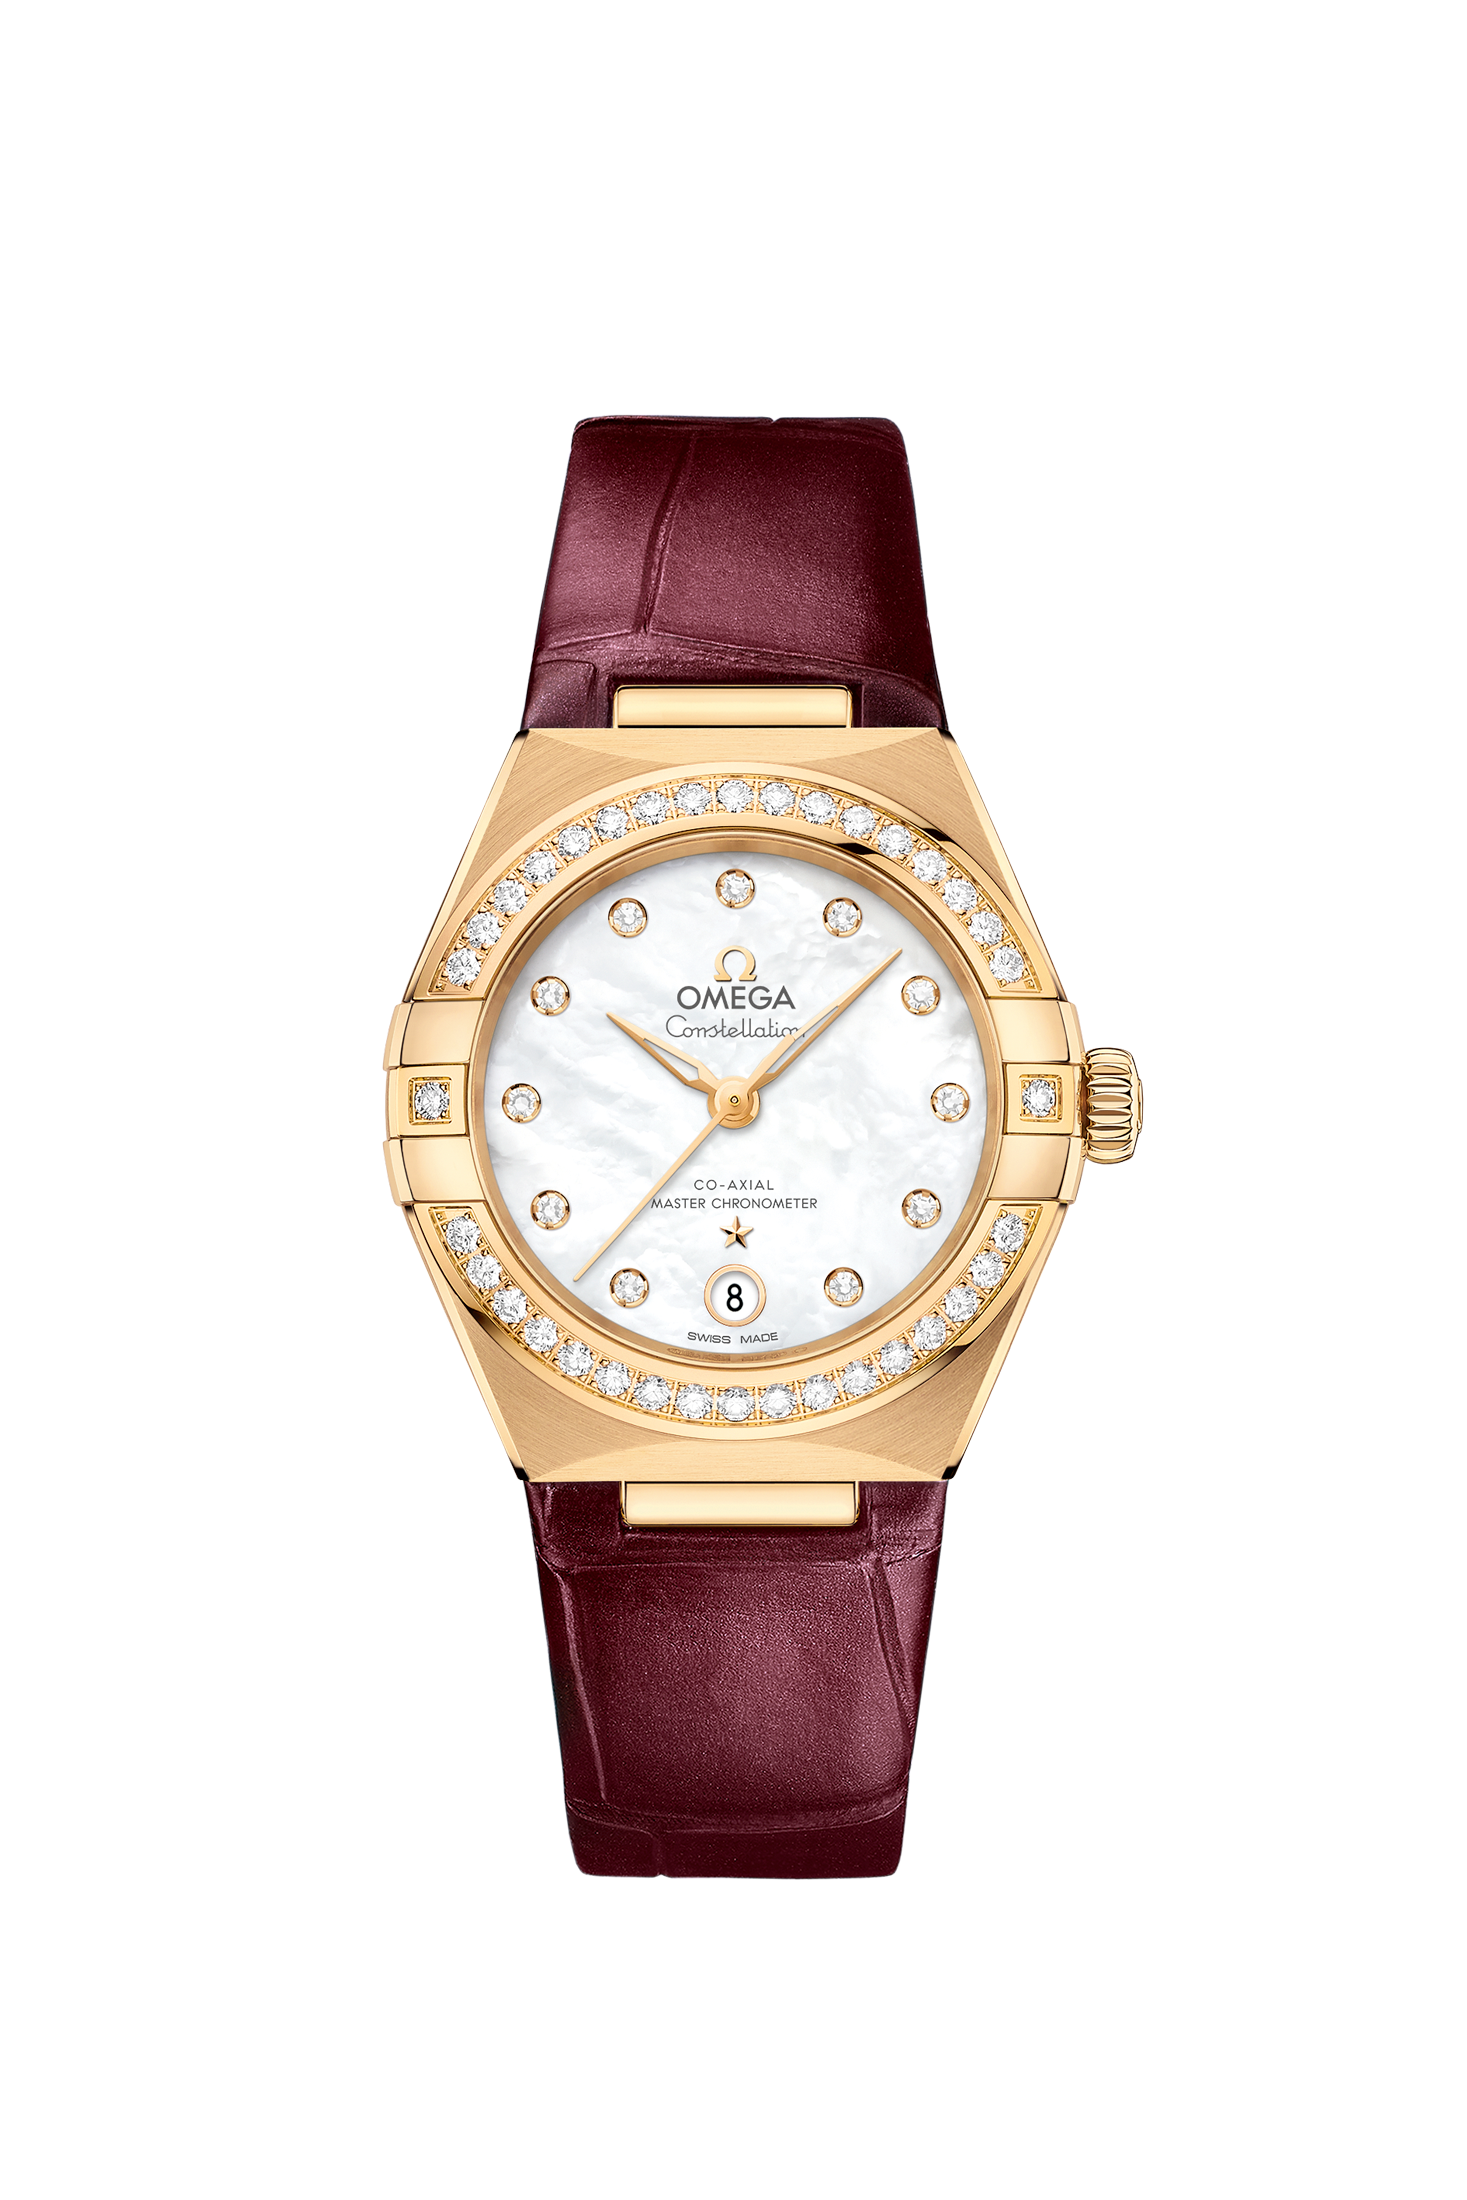 Ladies' watch  OMEGA, Constellation Co Axial Master Chronometer / 29mm, SKU: 131.58.29.20.55.001 | watchapproach.com